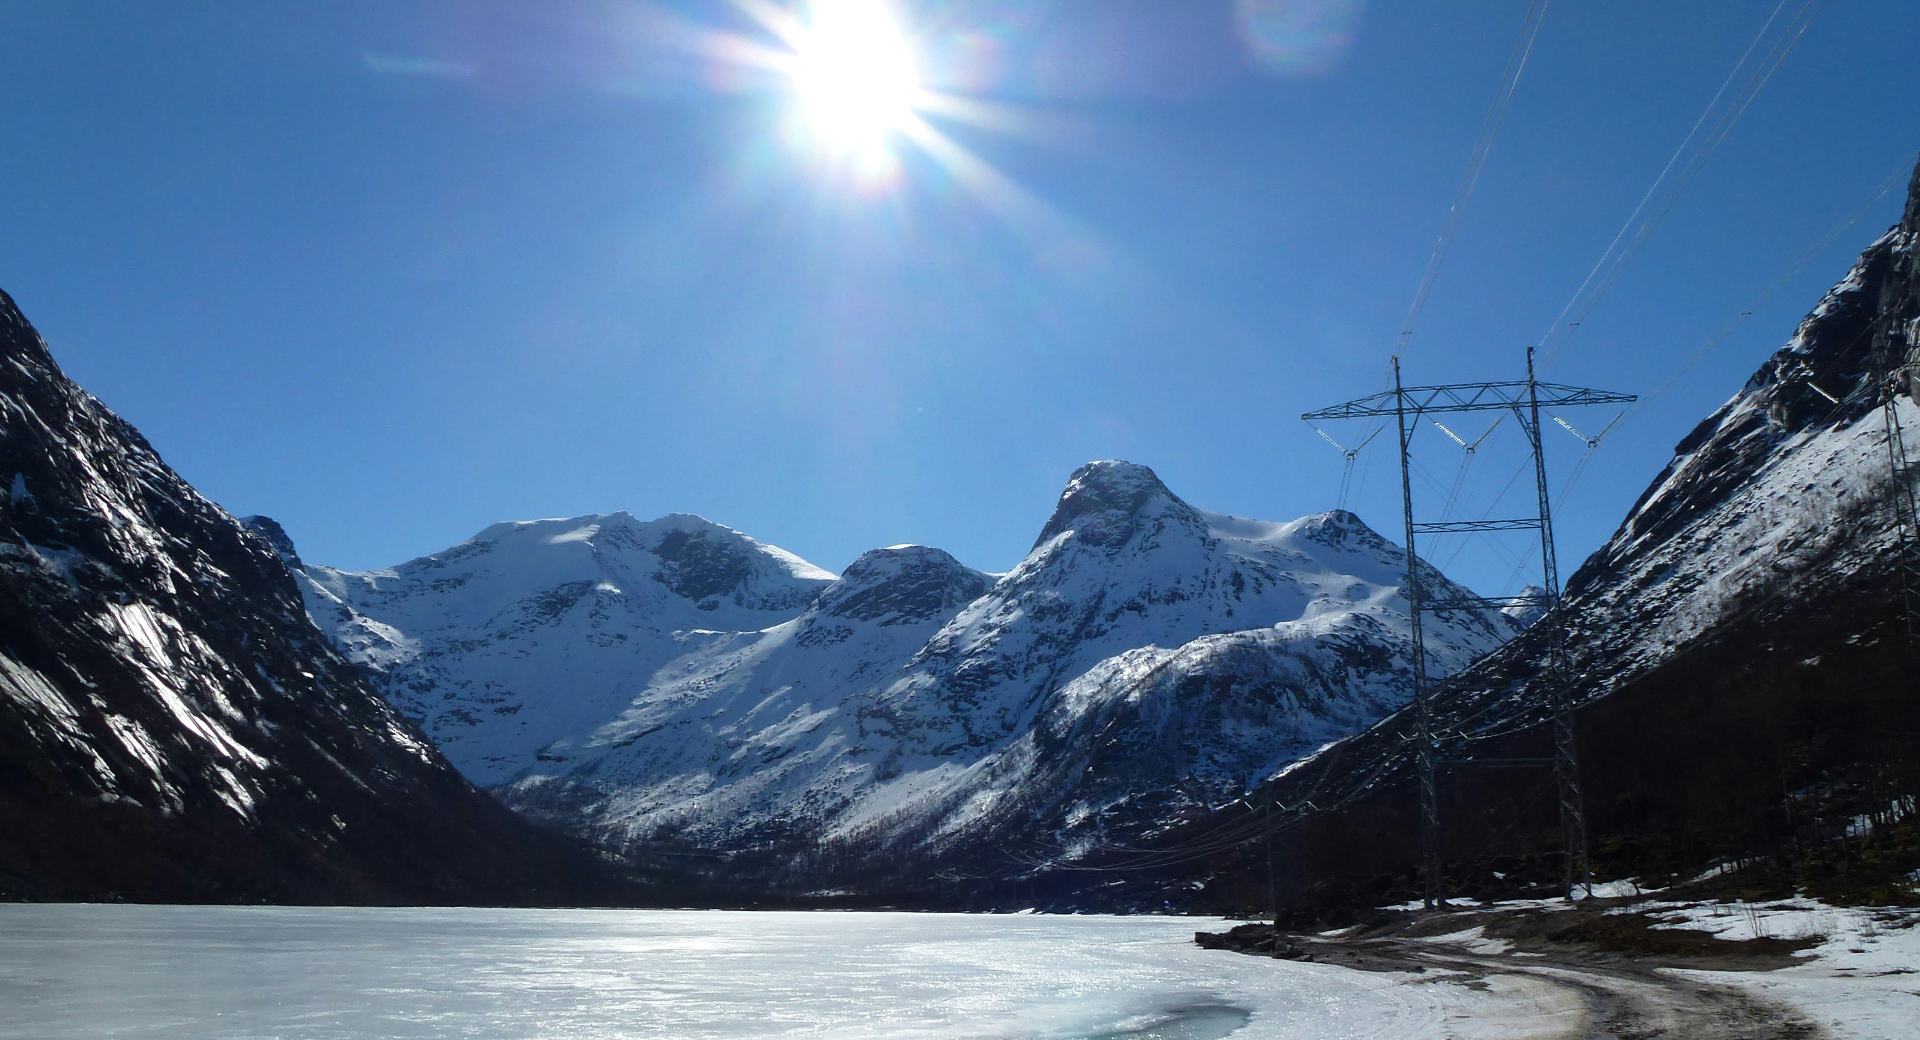 Bright sun reflecting on snow covered mountain, lake and transmission tower